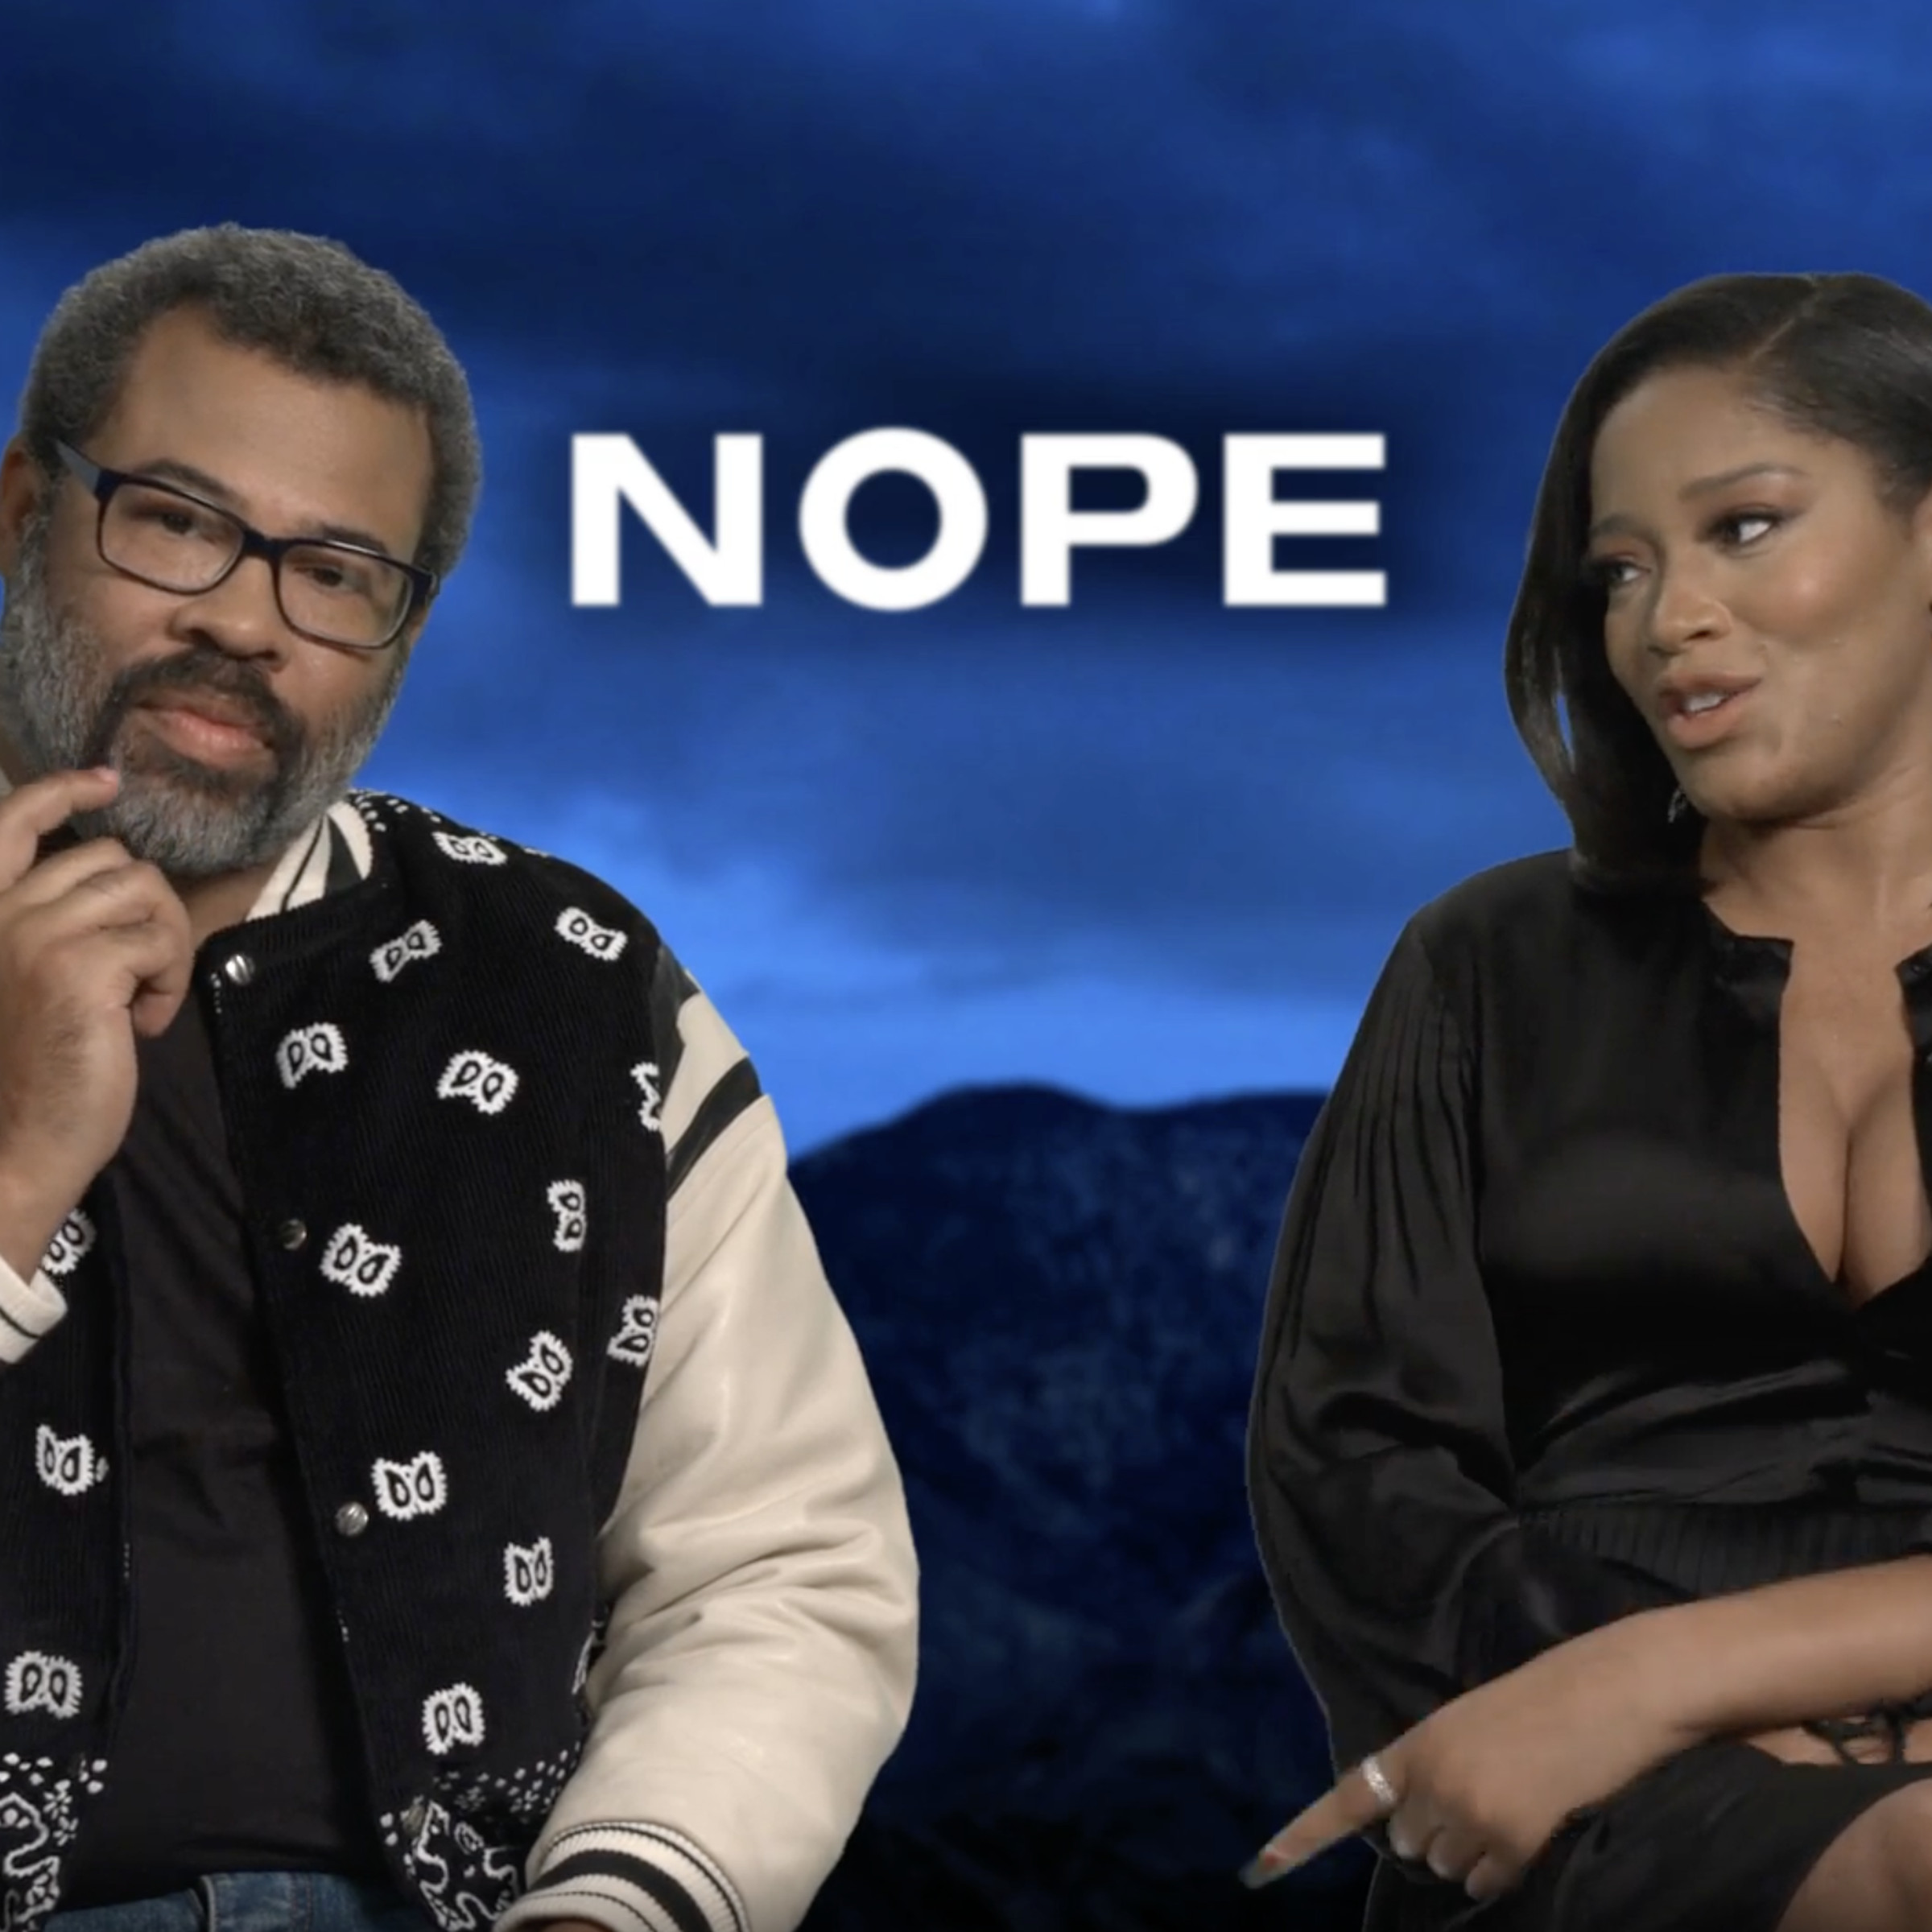 Jordan Peele wearing a black bomber jacket with white sleeves and a paisley-like pattern and Keke Palmer in a silk dress. Both are sitting in front of a screenshot from the movie Nope depicting an overcast sky and mountains.